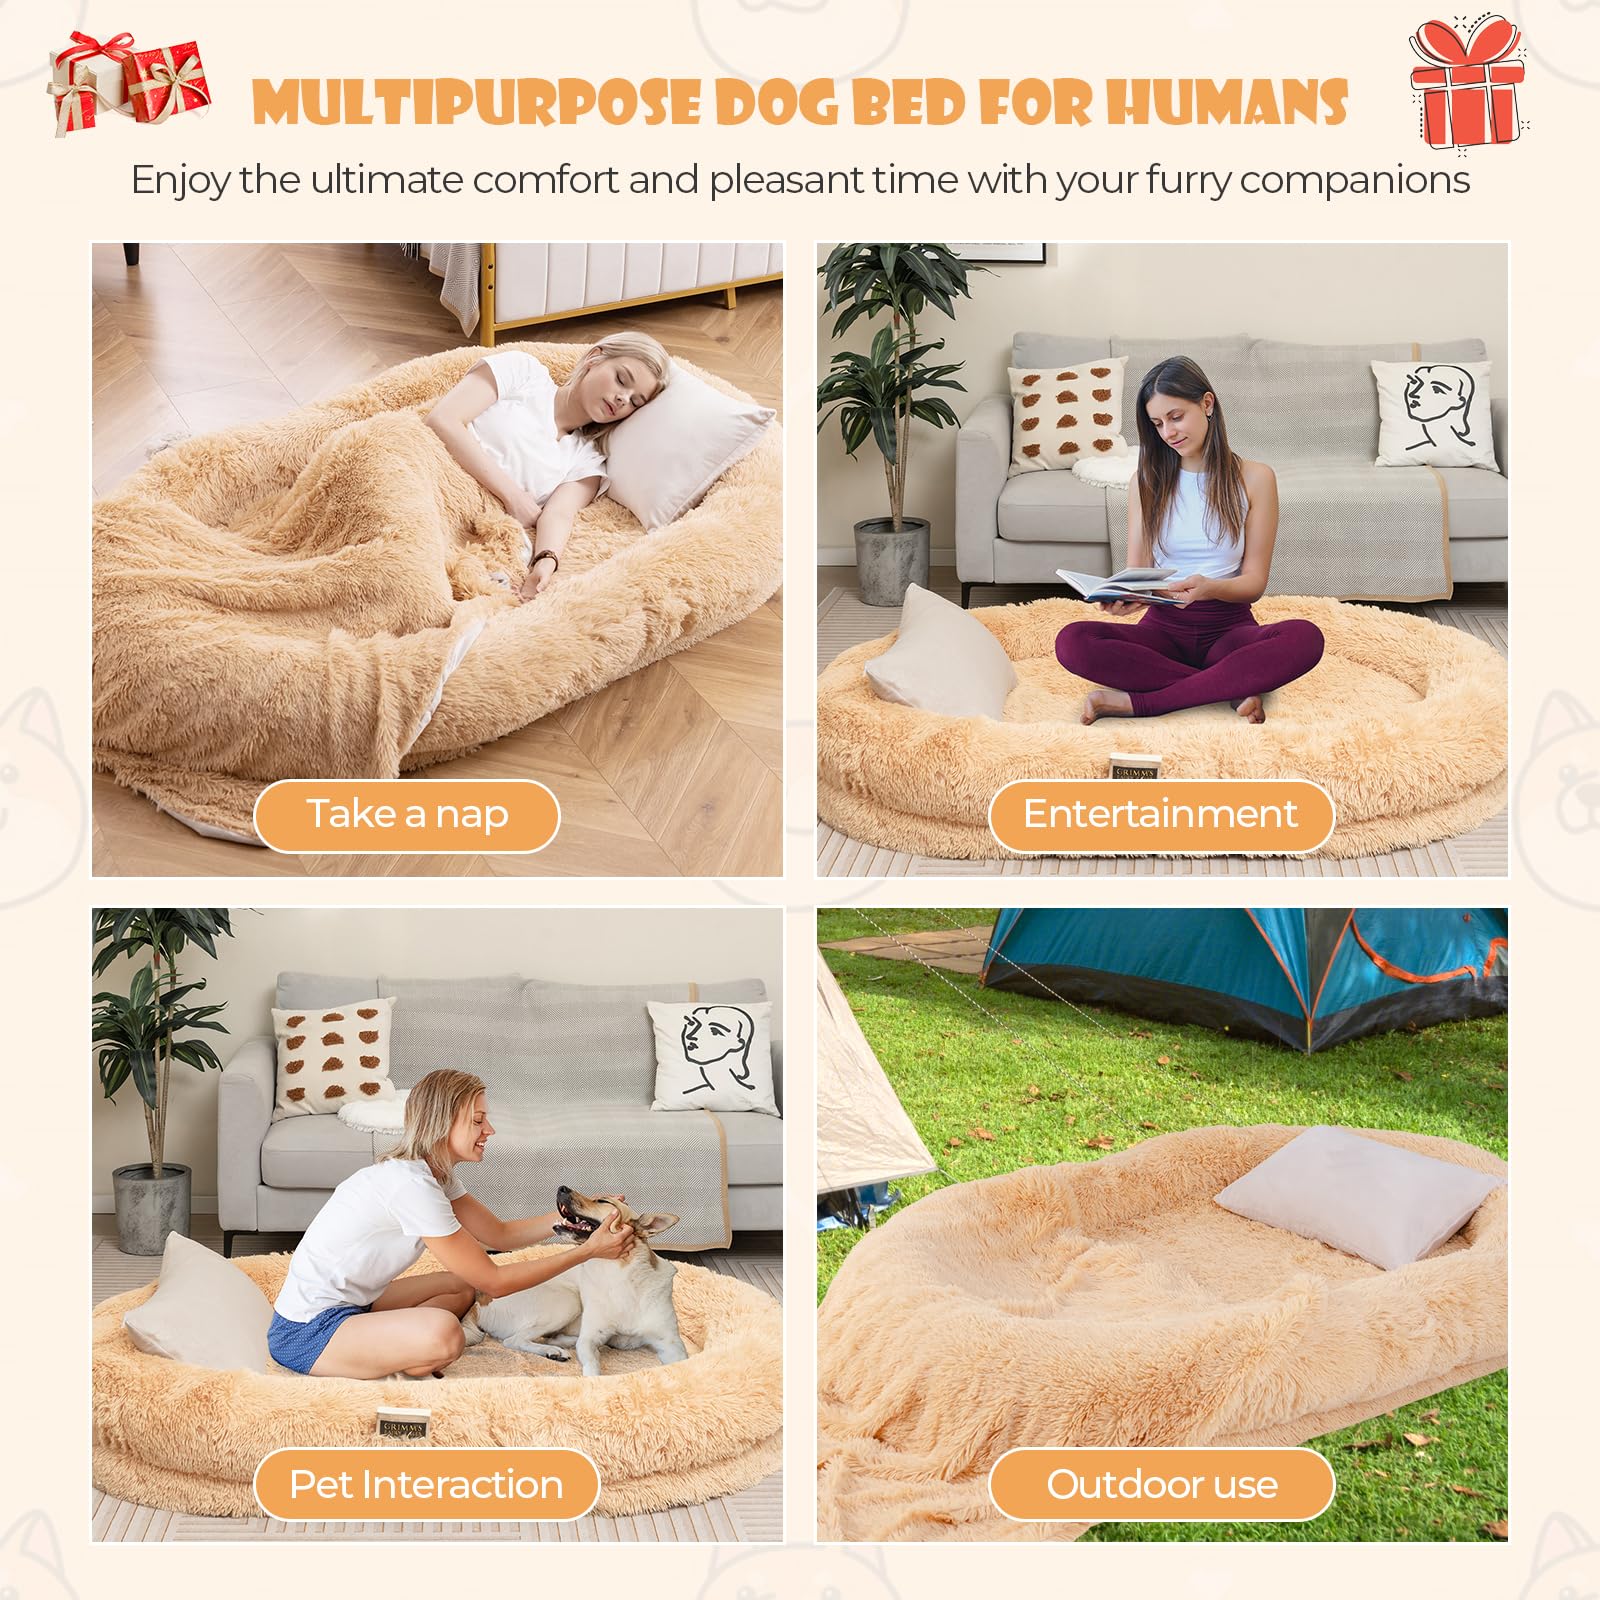 Giantex Human Dog Bed - 71" x 45" Large Human Size Dog Bed for Adult